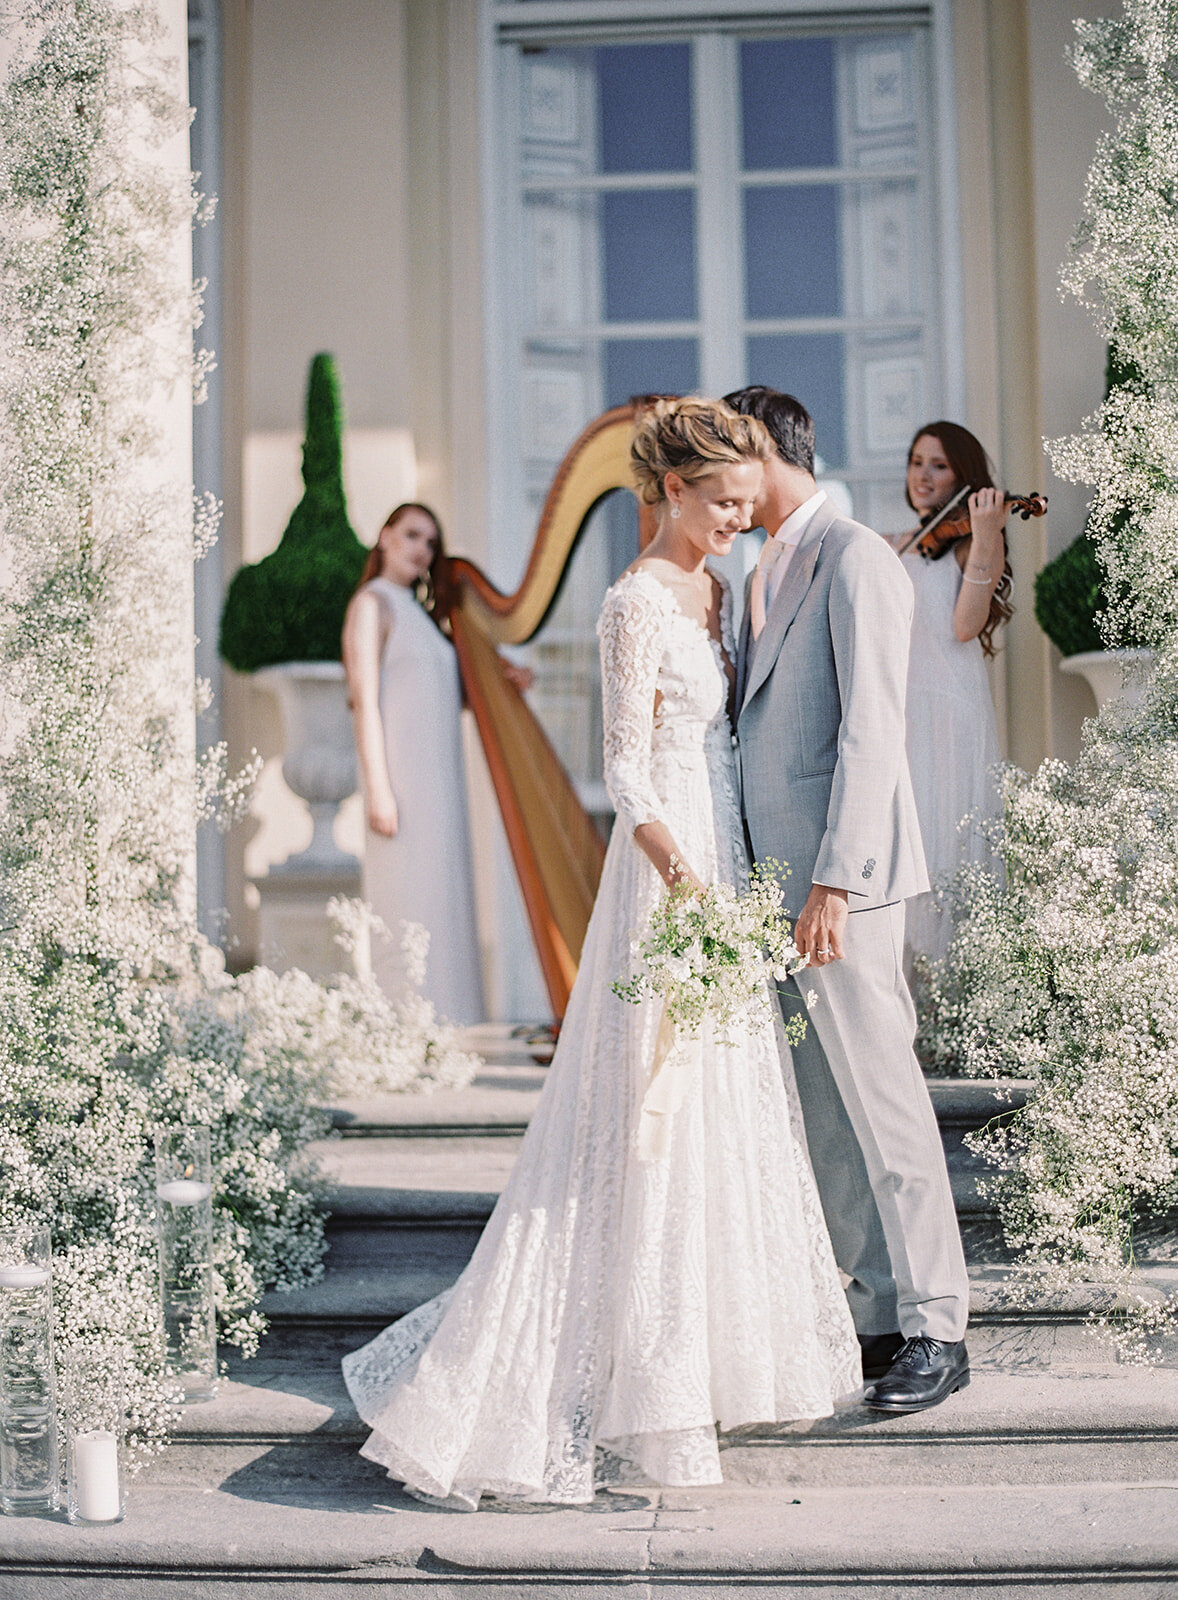 Groom whispering to bride during ceremony on front steps of villa. Harpist and violinist in the background. Photographed by Italy wedding photographer Amy Mulder Photography